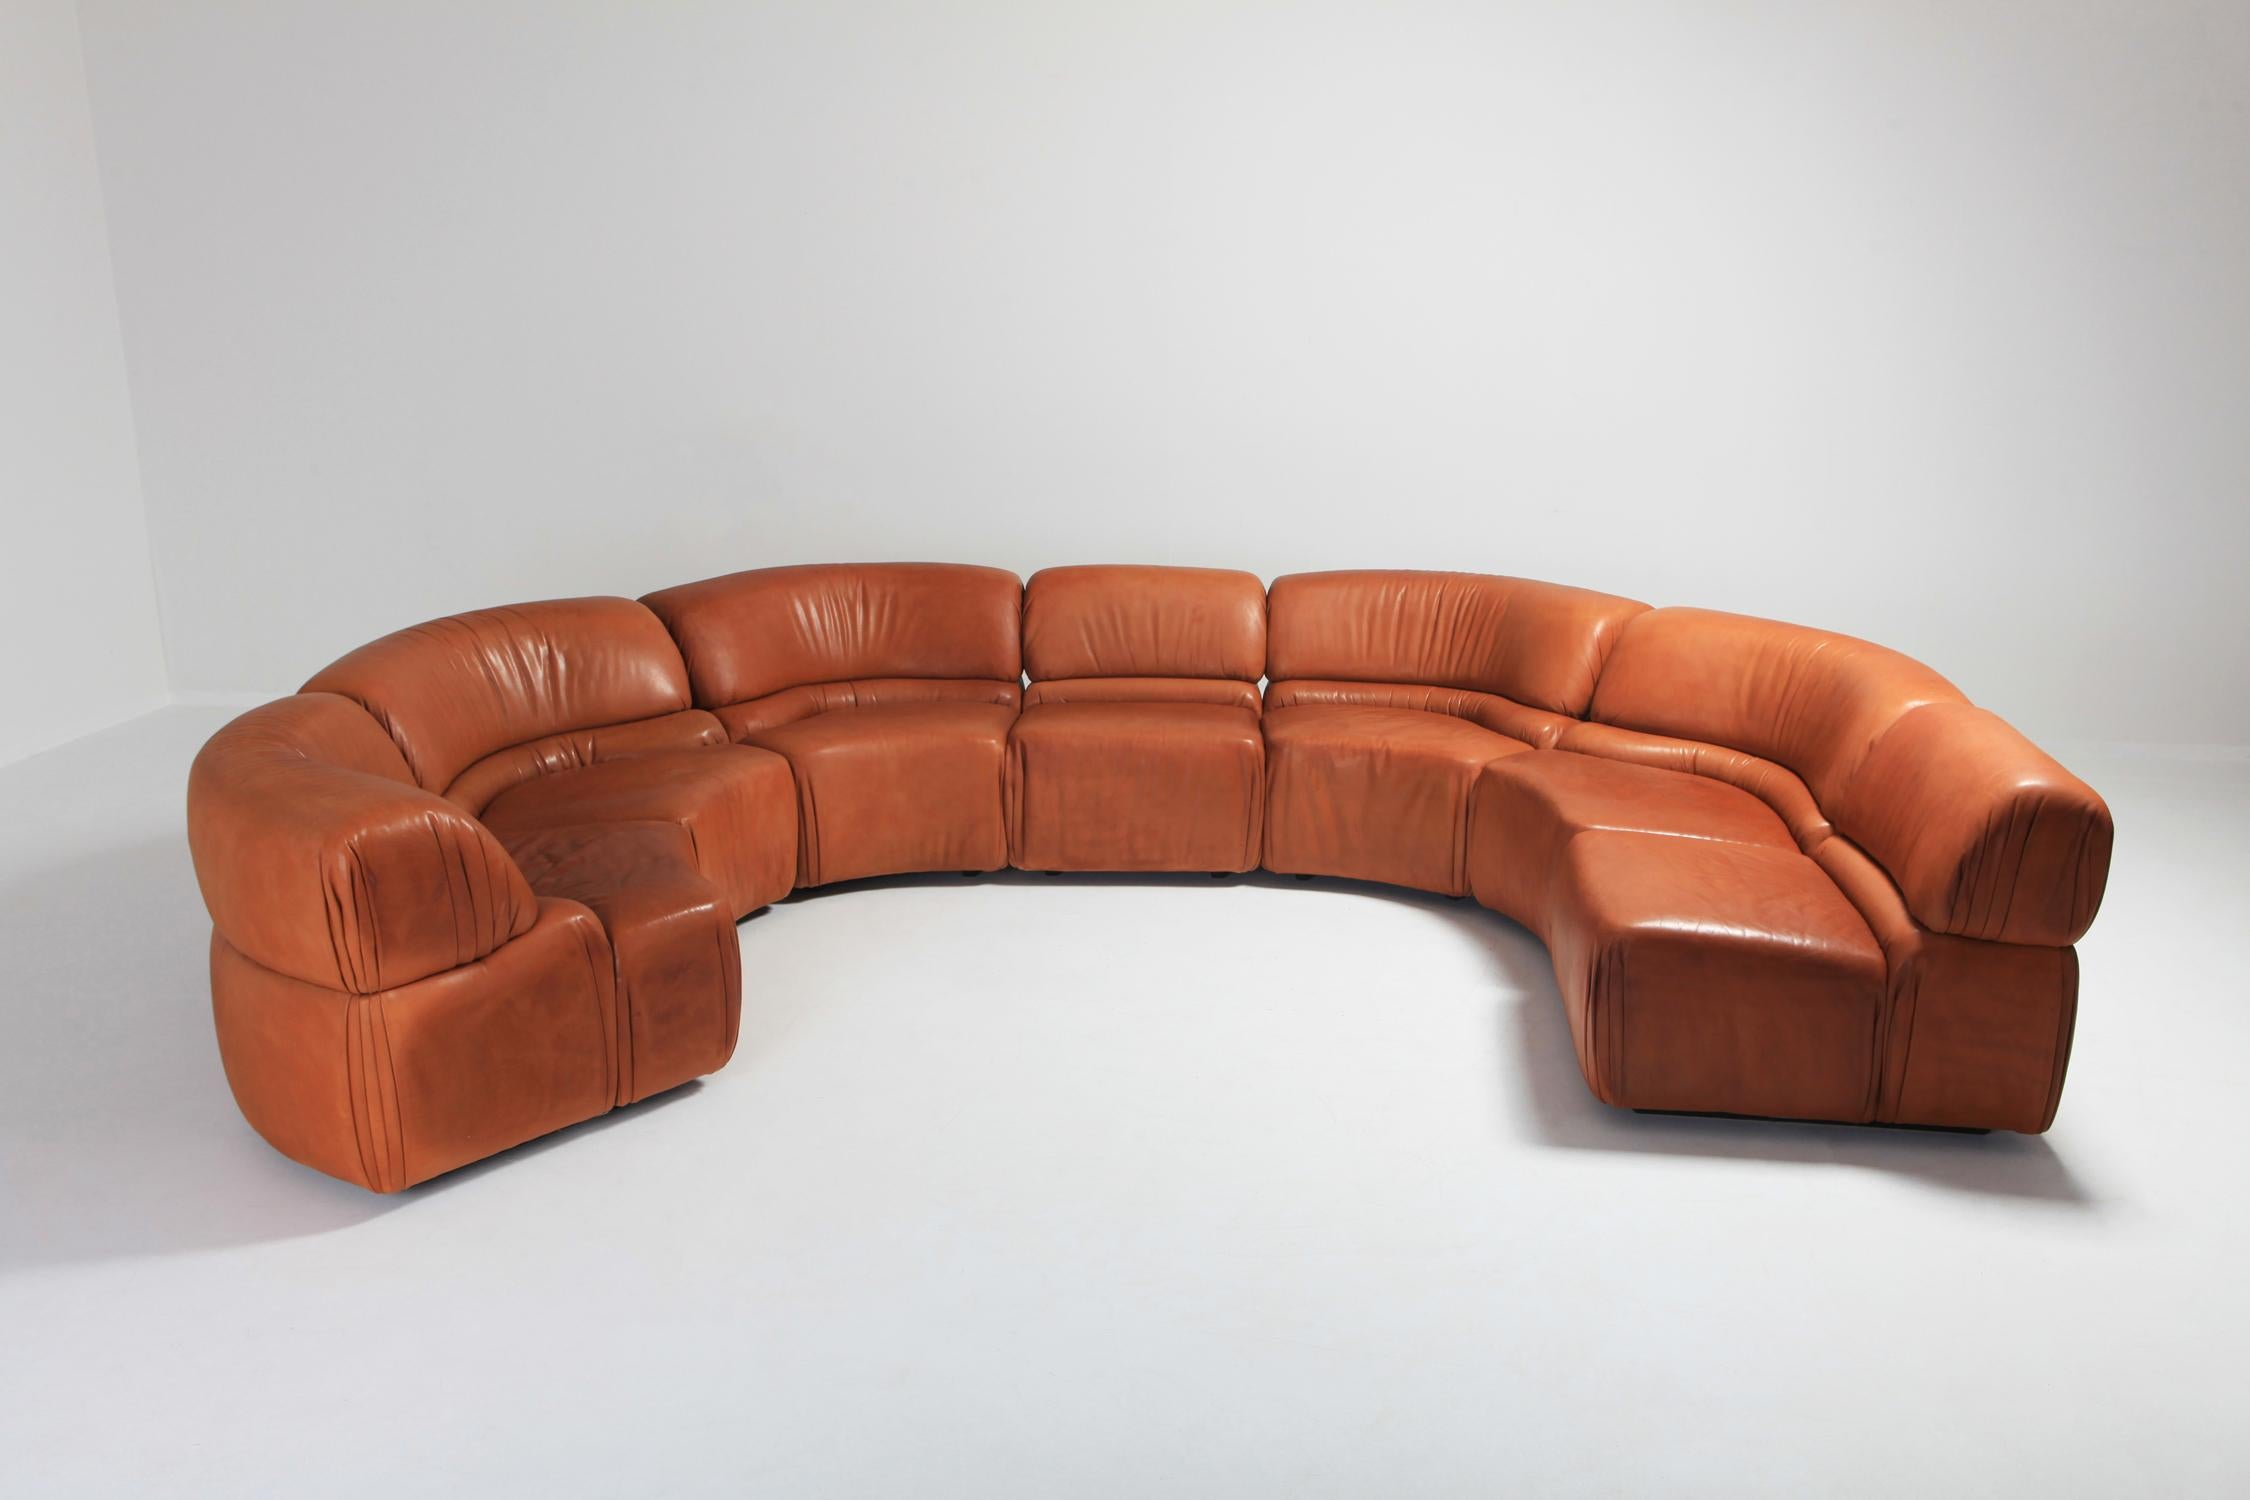 Modular De Sede 'Cosmos' sofa in original cognac leather.

Iconic and stunning sectional sofa consisting of 7 pieces by Swiss leading luxury leather manufacturer De Sede.
A 1970s Mid-Century Modern high end piece in great condition.

De Sede